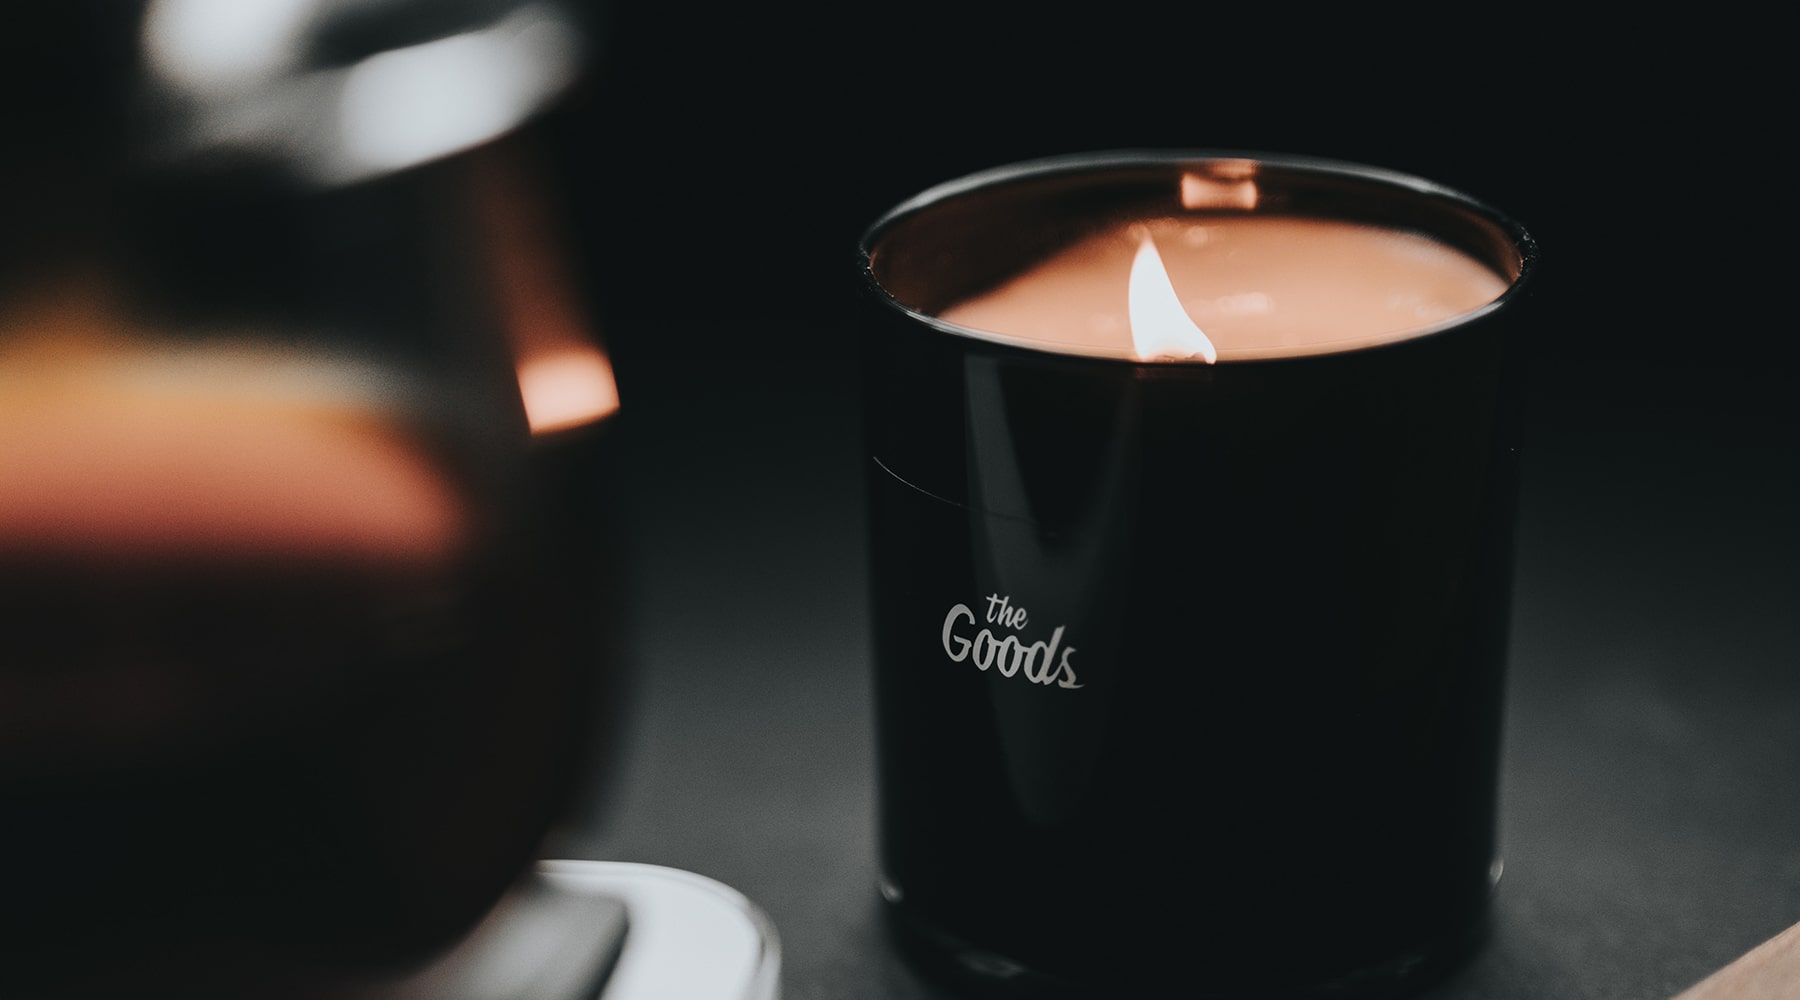 scented-candle